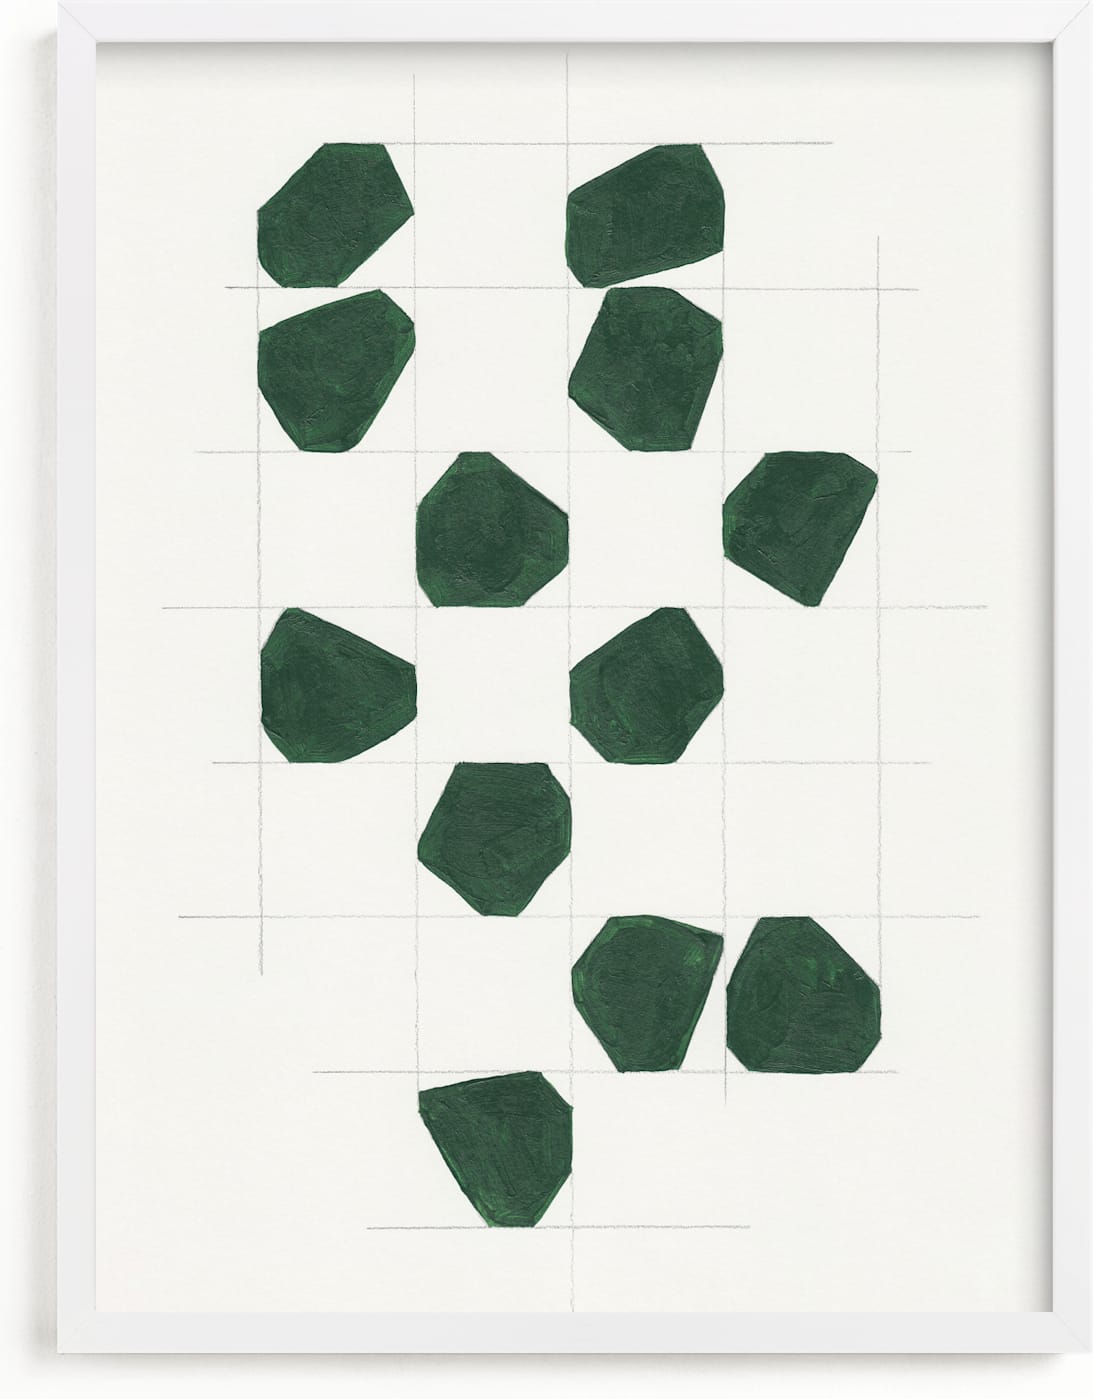 This is a white, grey, green art by Alisa Galitsyna called Within the Lines.